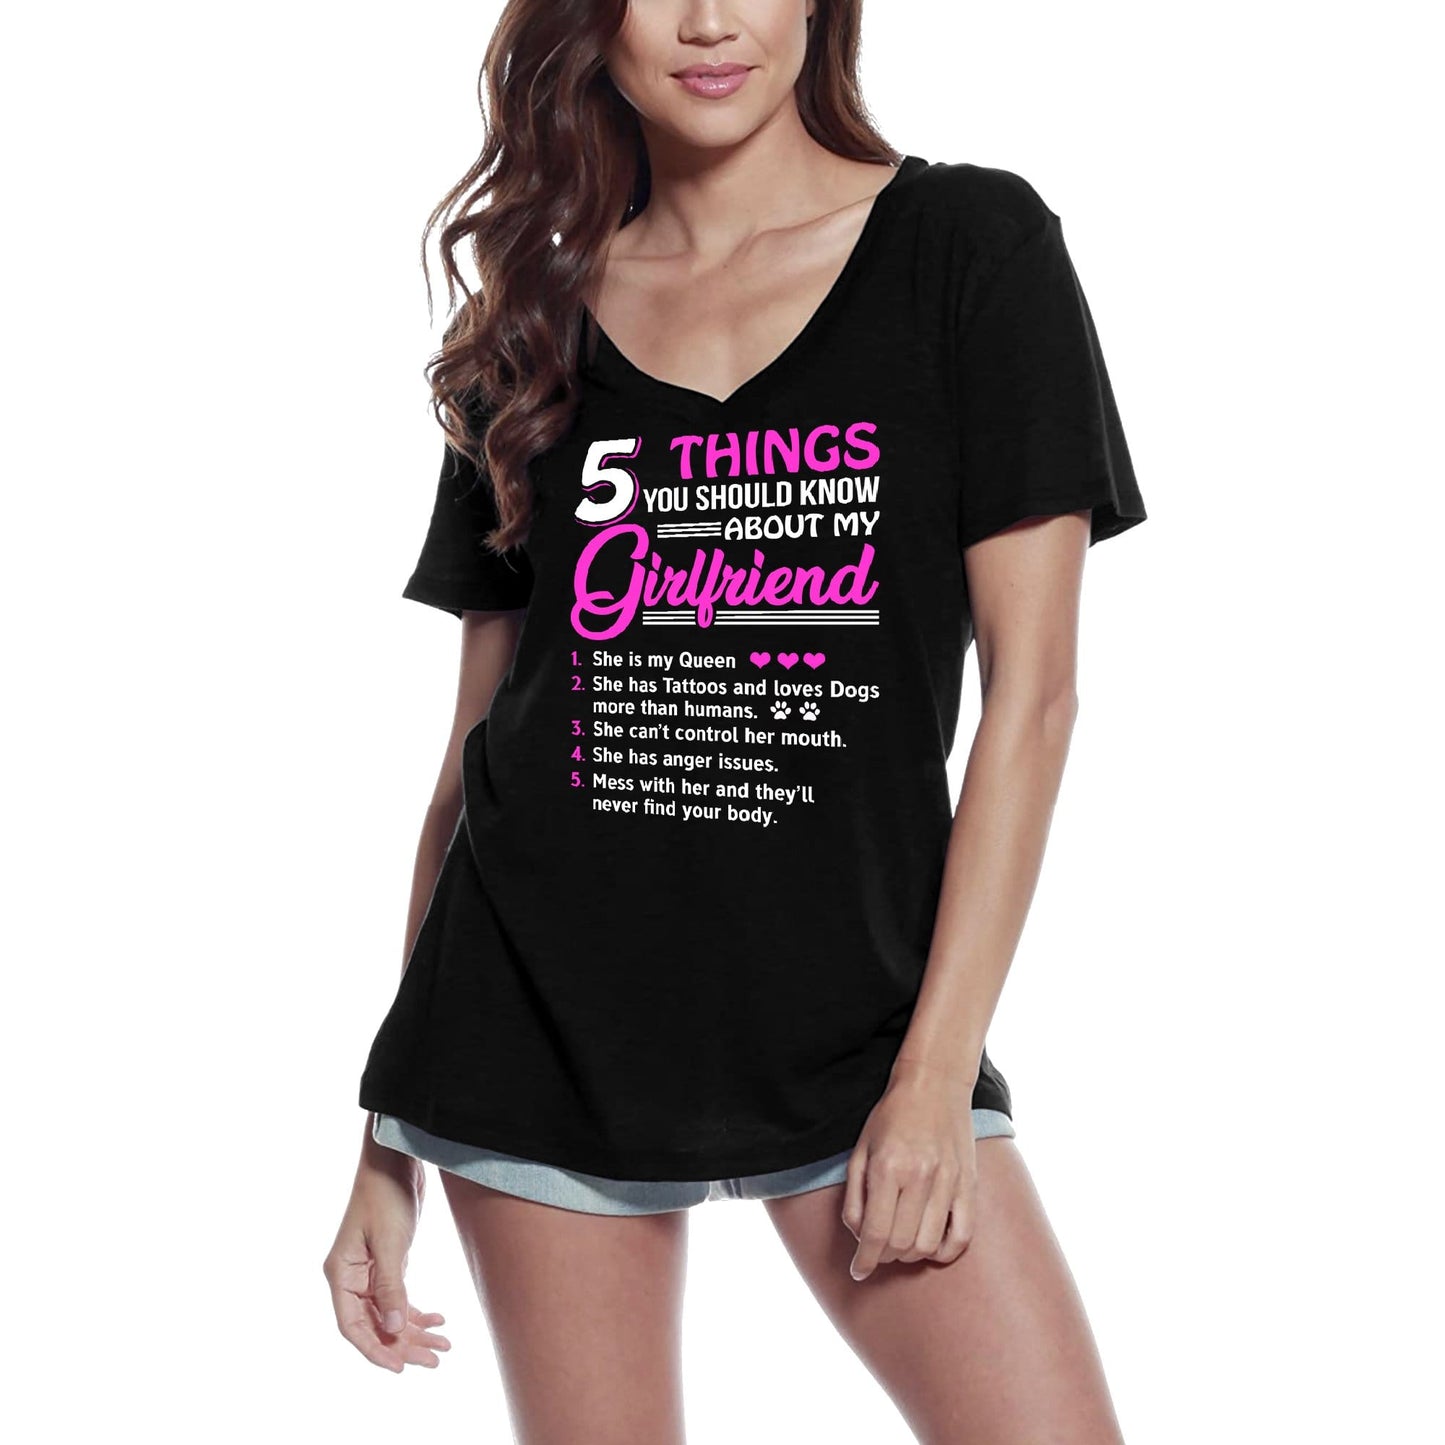 ULTRABASIC Women's T-Shirt 5 Things You Should Know About My Girlfriend - LGBT Sarcastic Lovers Short Sleeve Graphic Tees Tops